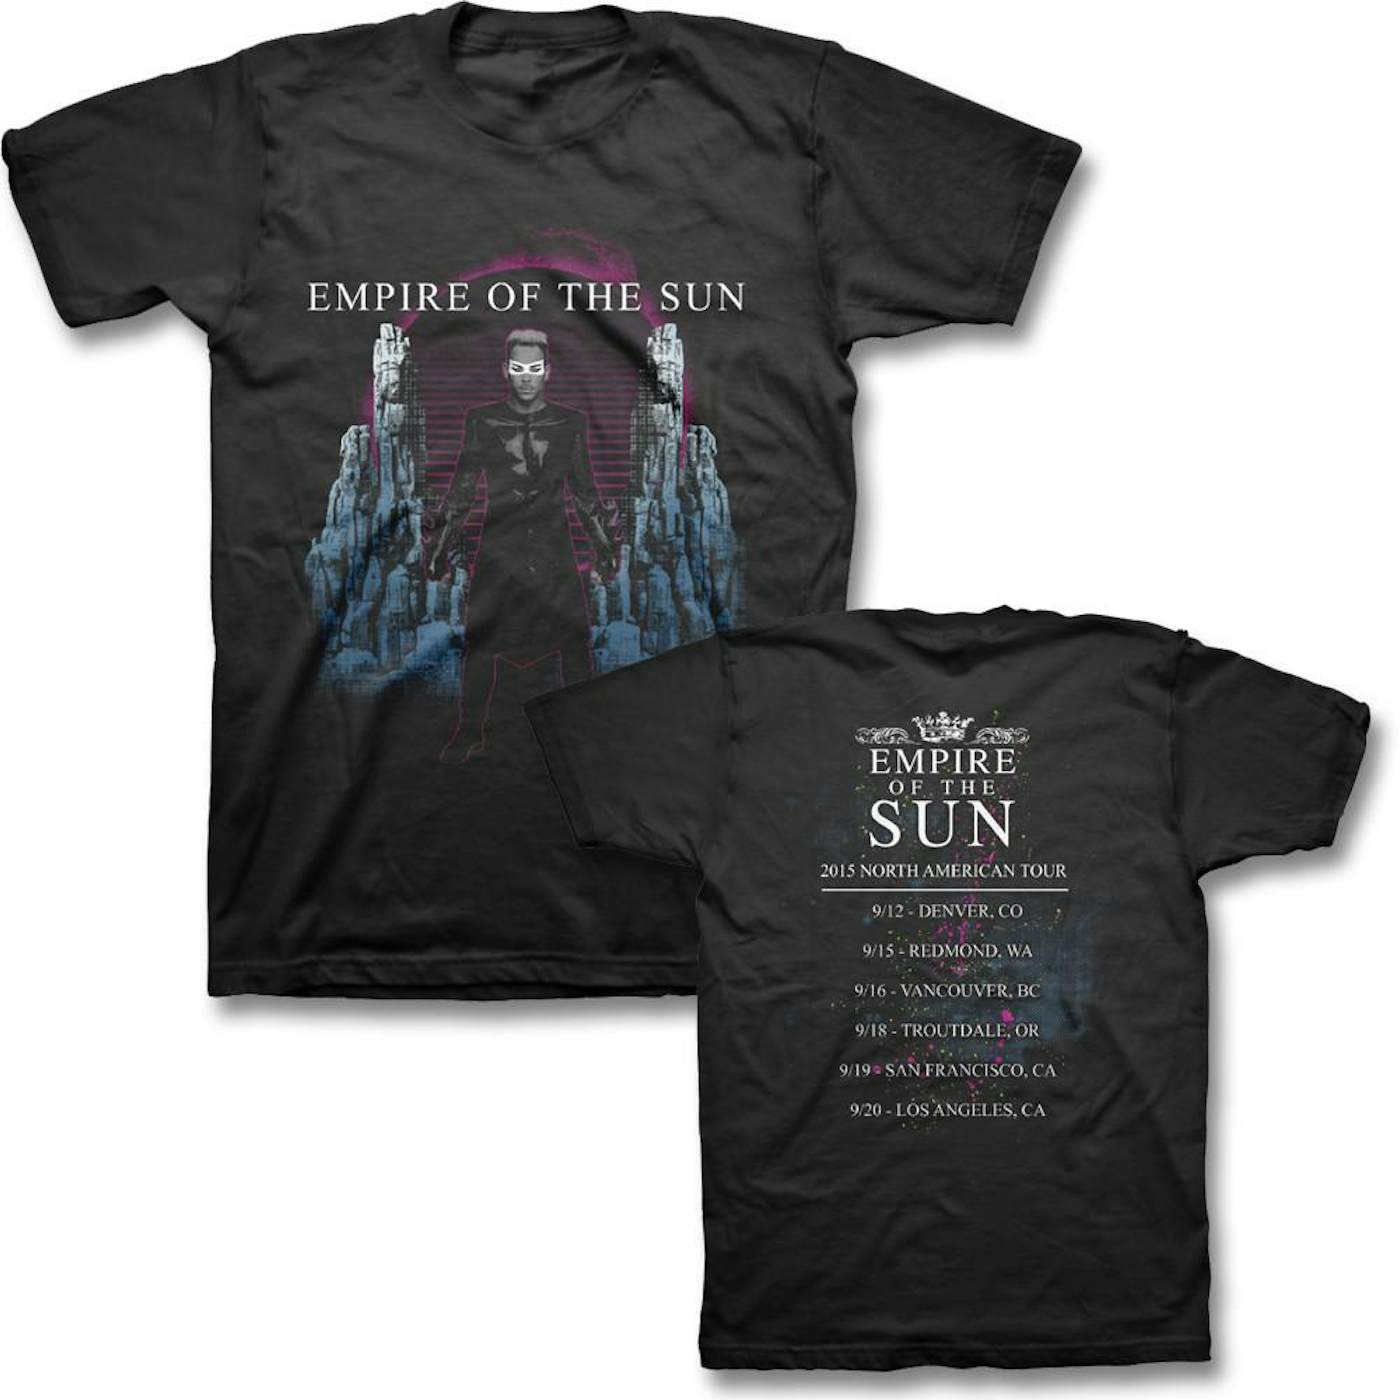 Empire of the Sun 2015 North American Tour T-shirt